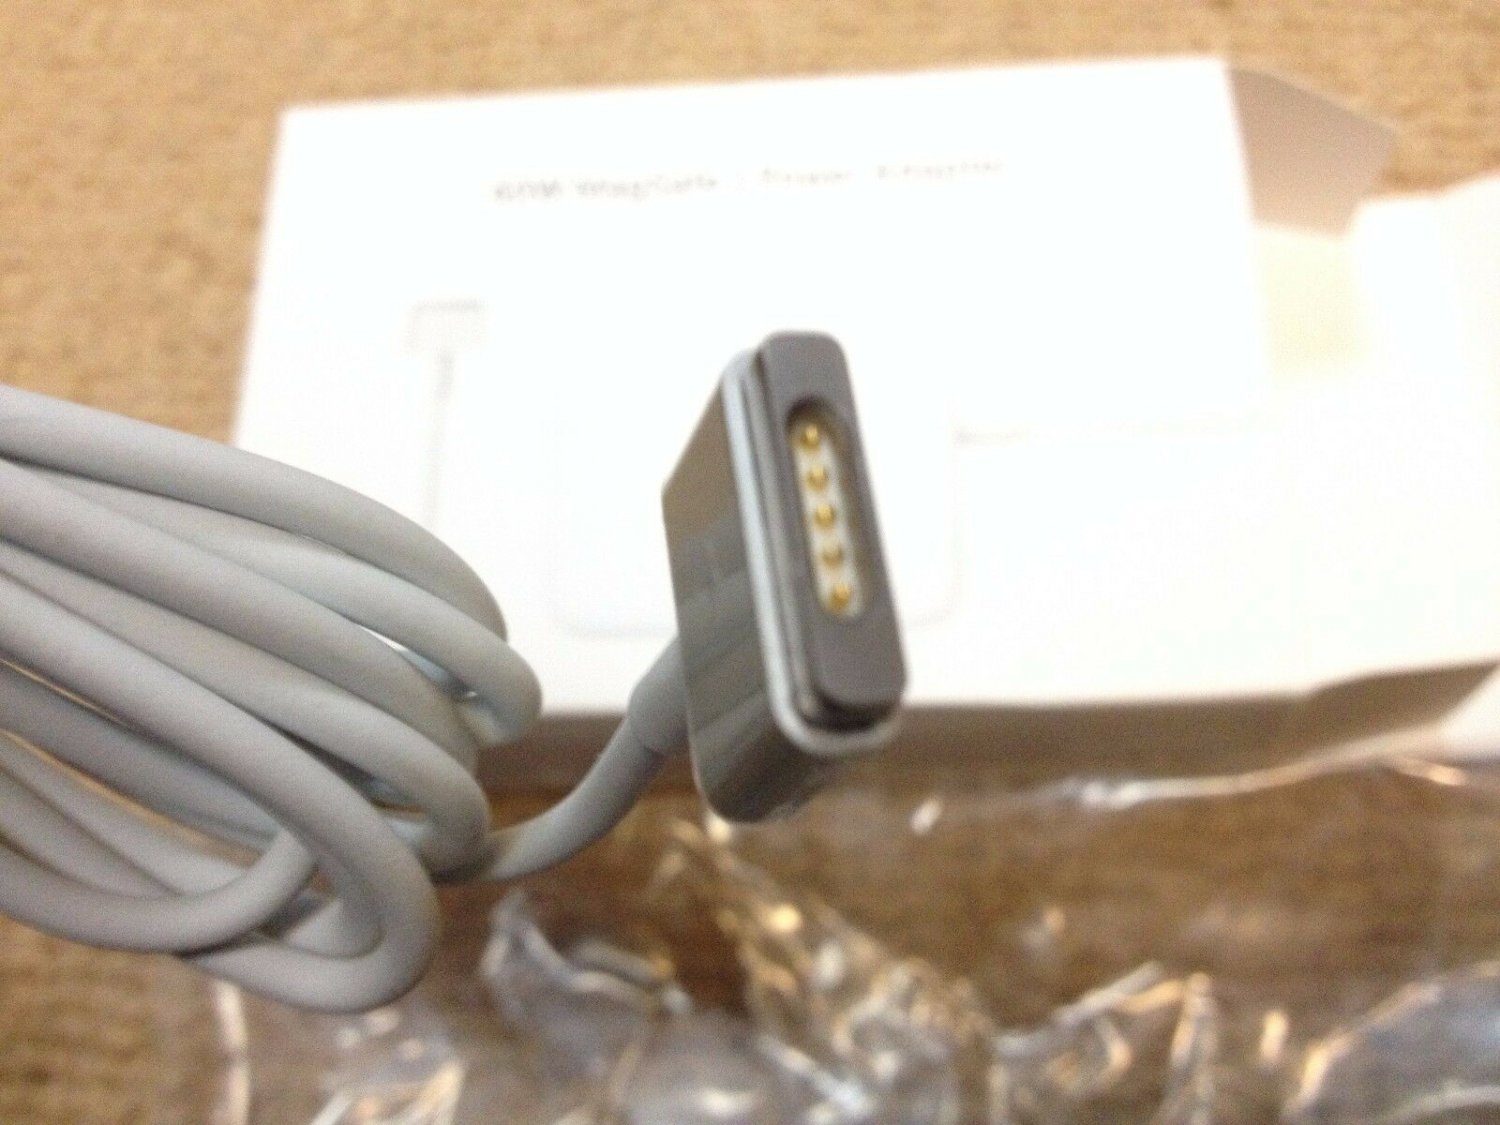 apple macbook a1181 mid 2009 charger